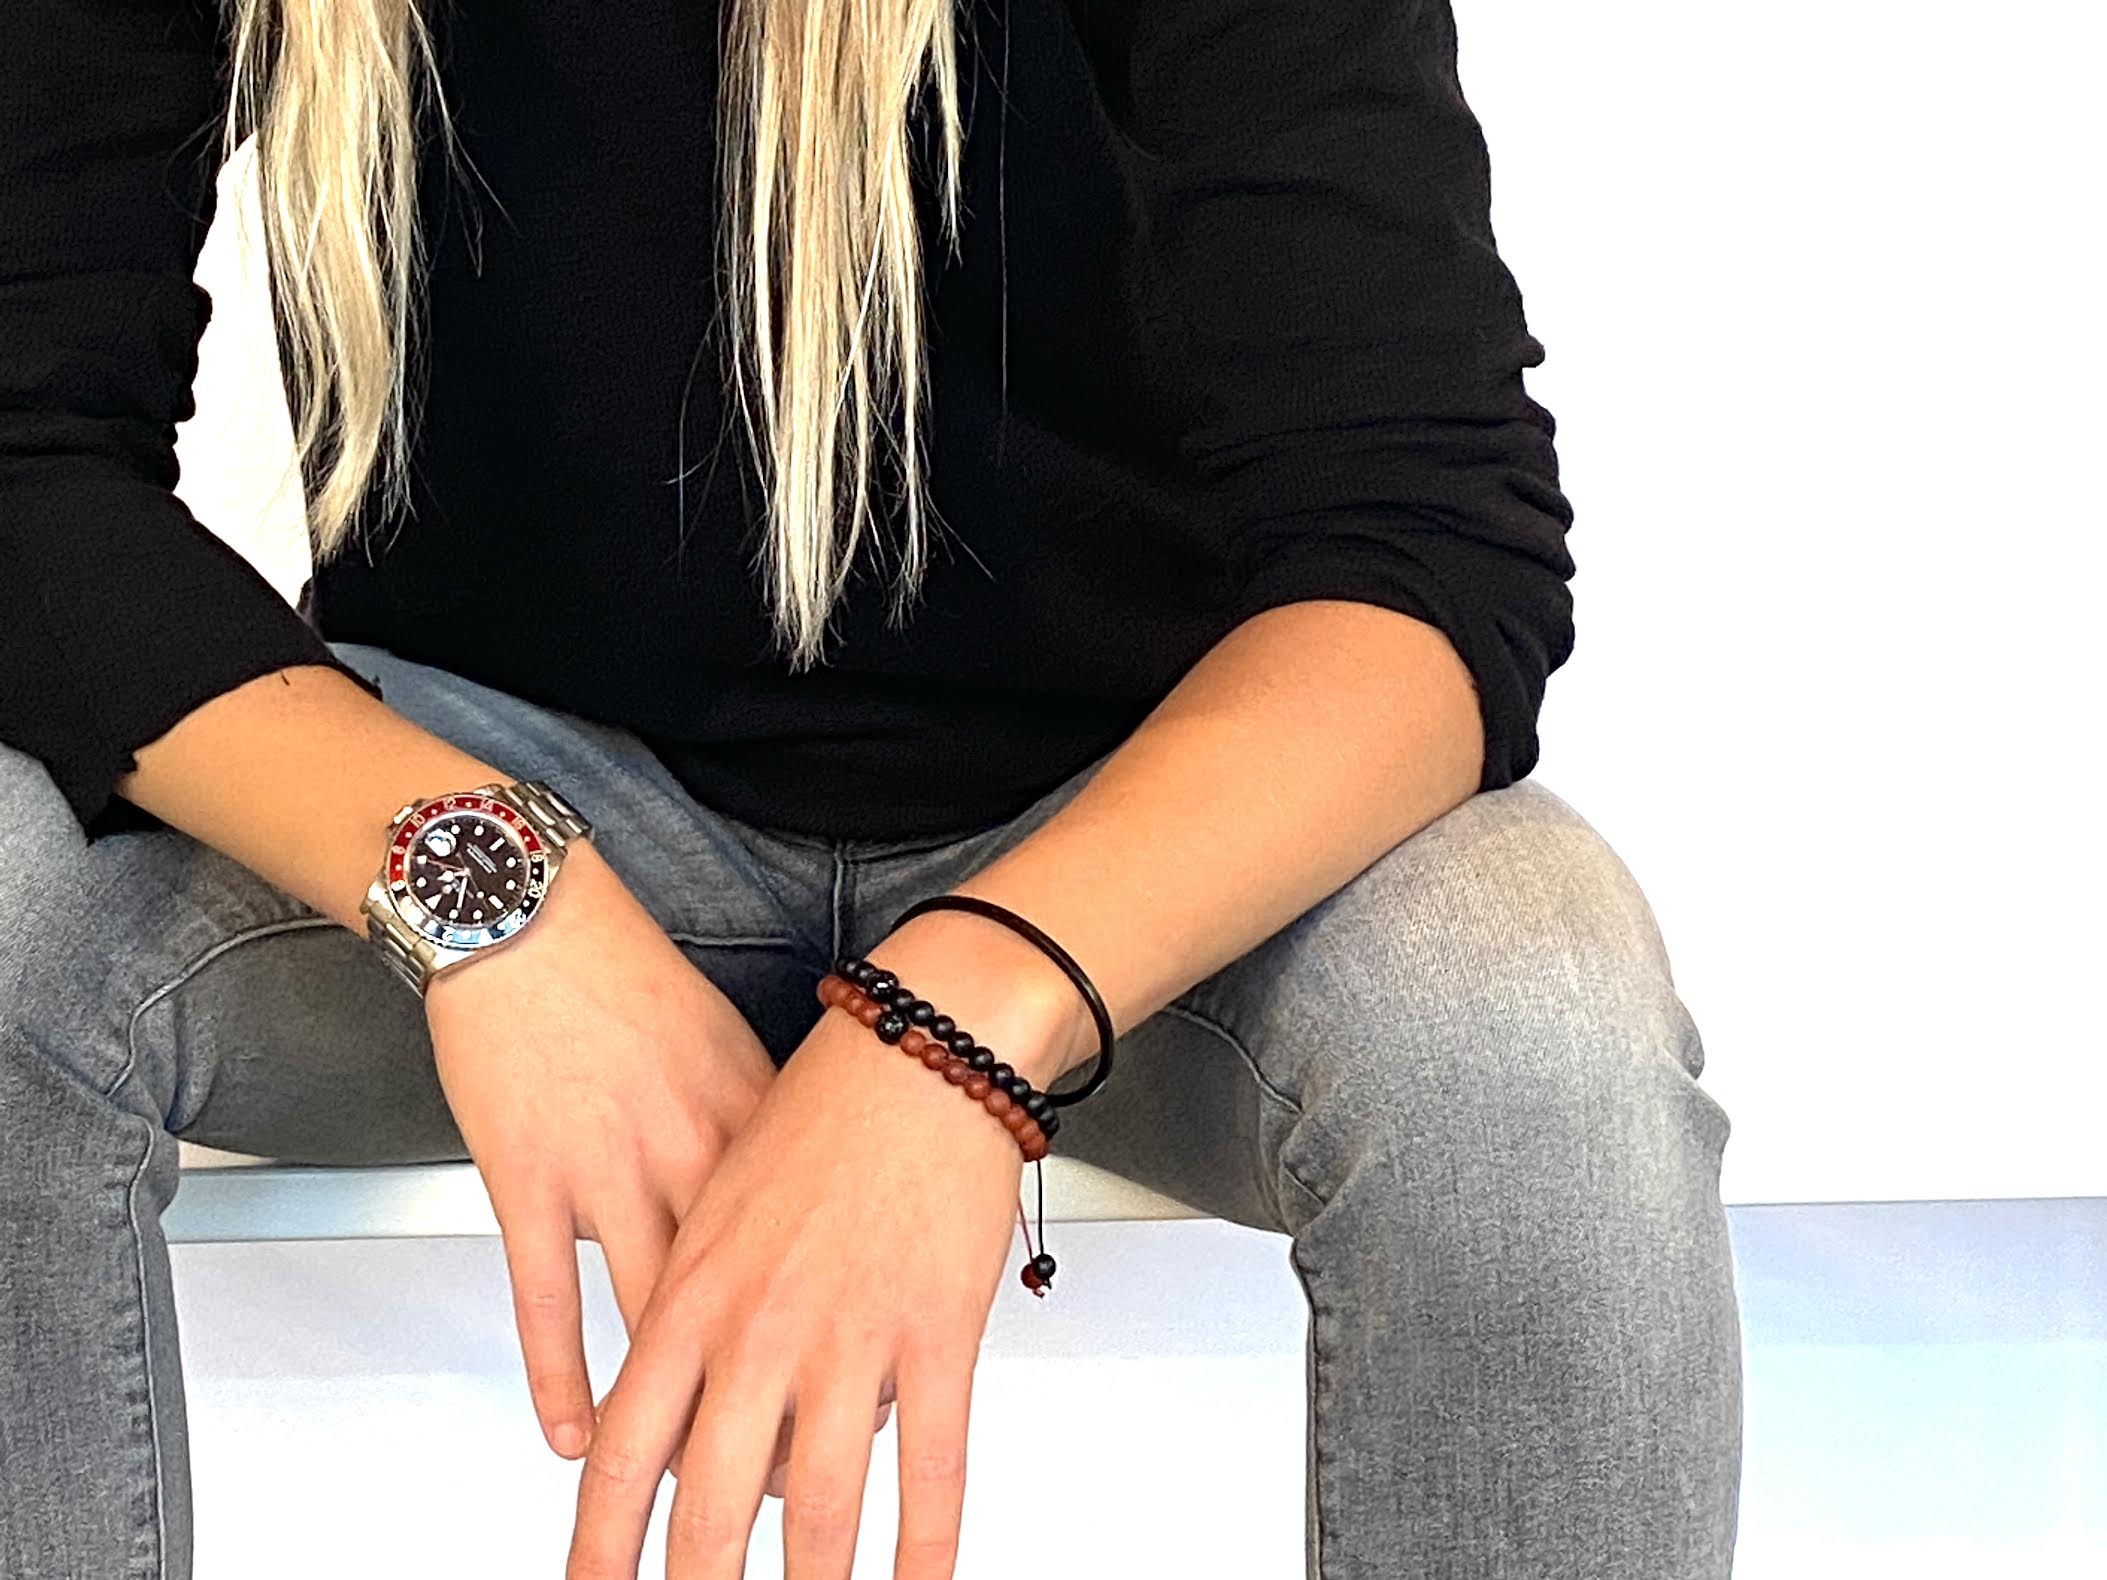 Carnelian symbolizes bold energy, warmth, and a joy that lingers. This popular beaded bracelet is accented with a single carved black onyx dragon bead for a cool, confident look. Hand knotted adjustable cord for a perfect fit. Made by WristBend